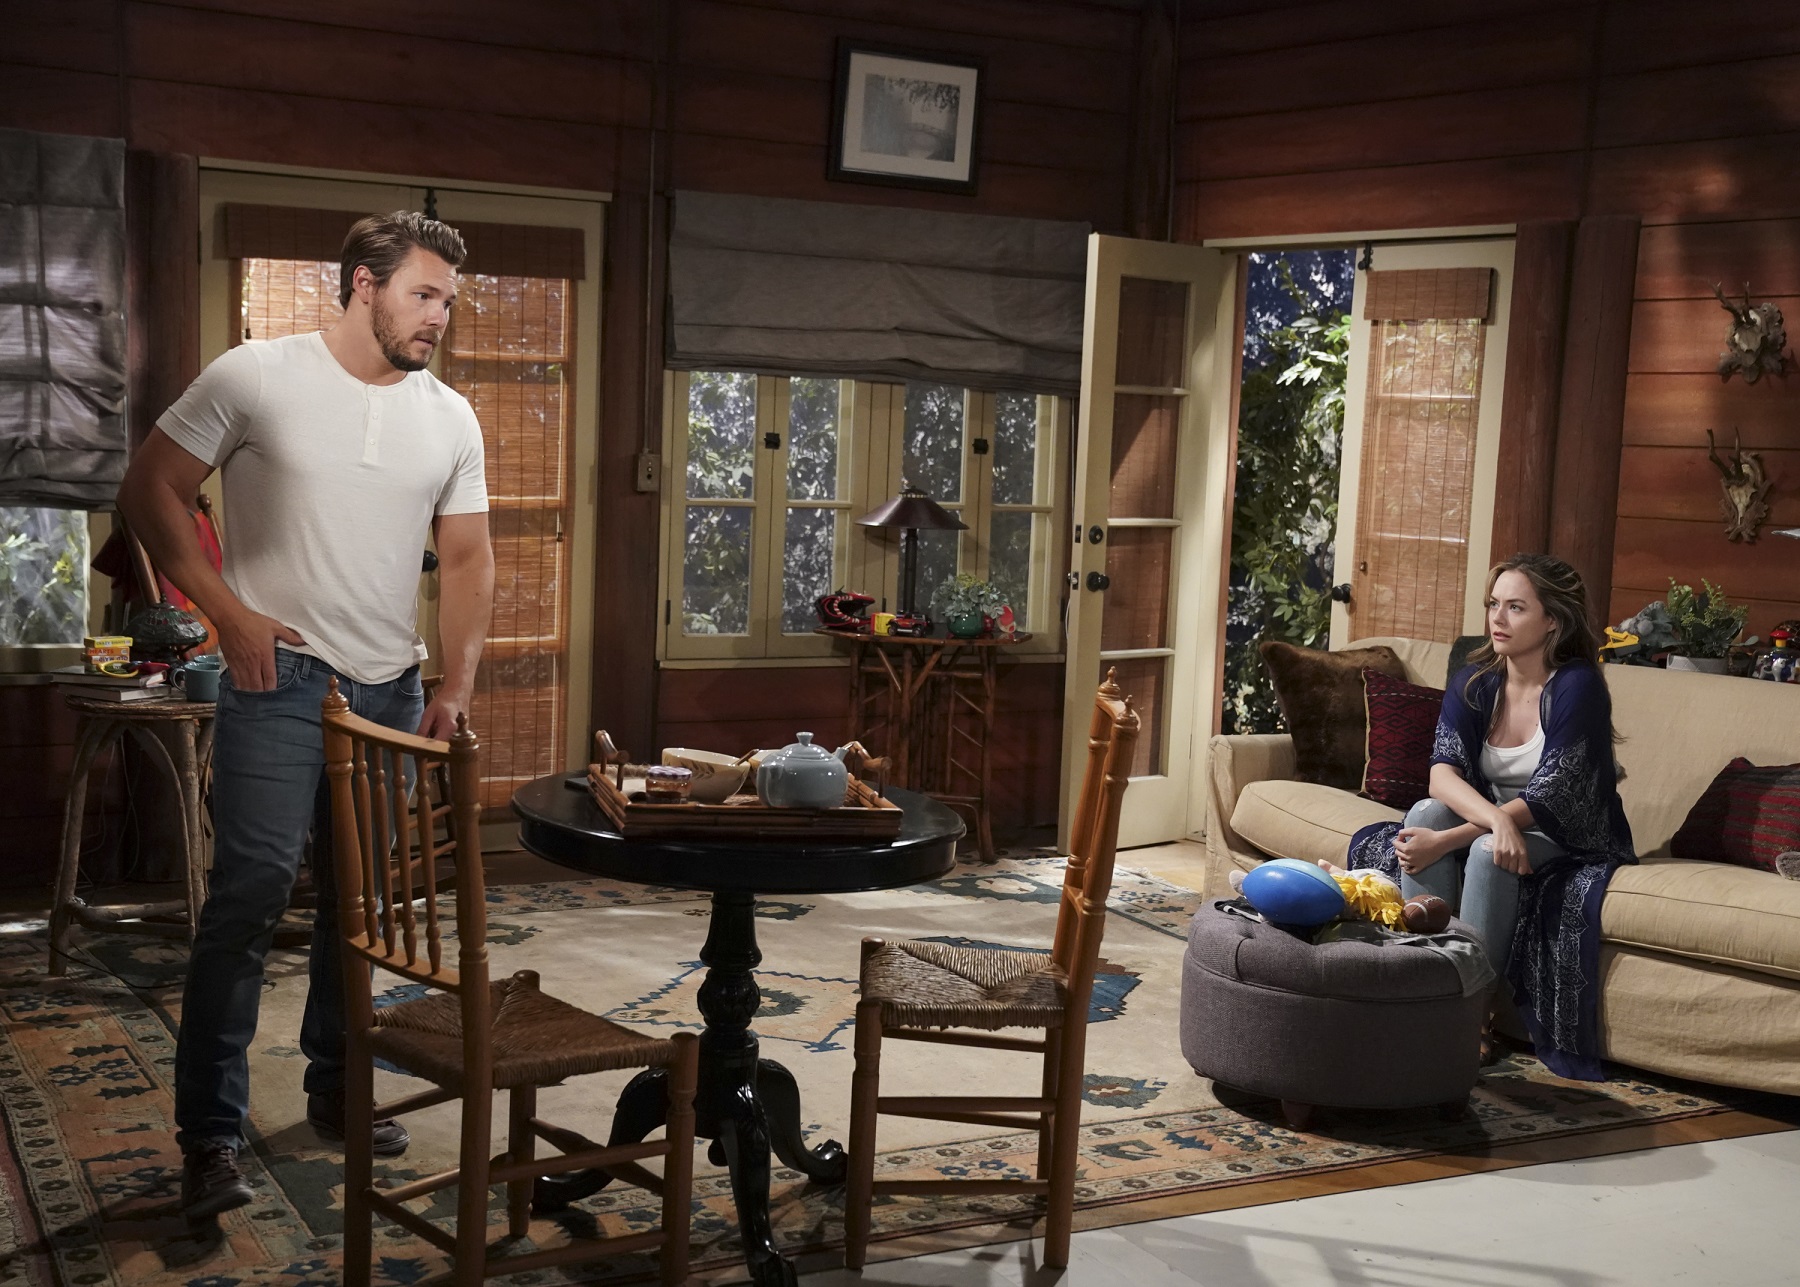 The Bold and the Beautiful stars Scott Clifton, in a white shirt and jeans, and Annika Noelle, in a black duster and sitting on the couch